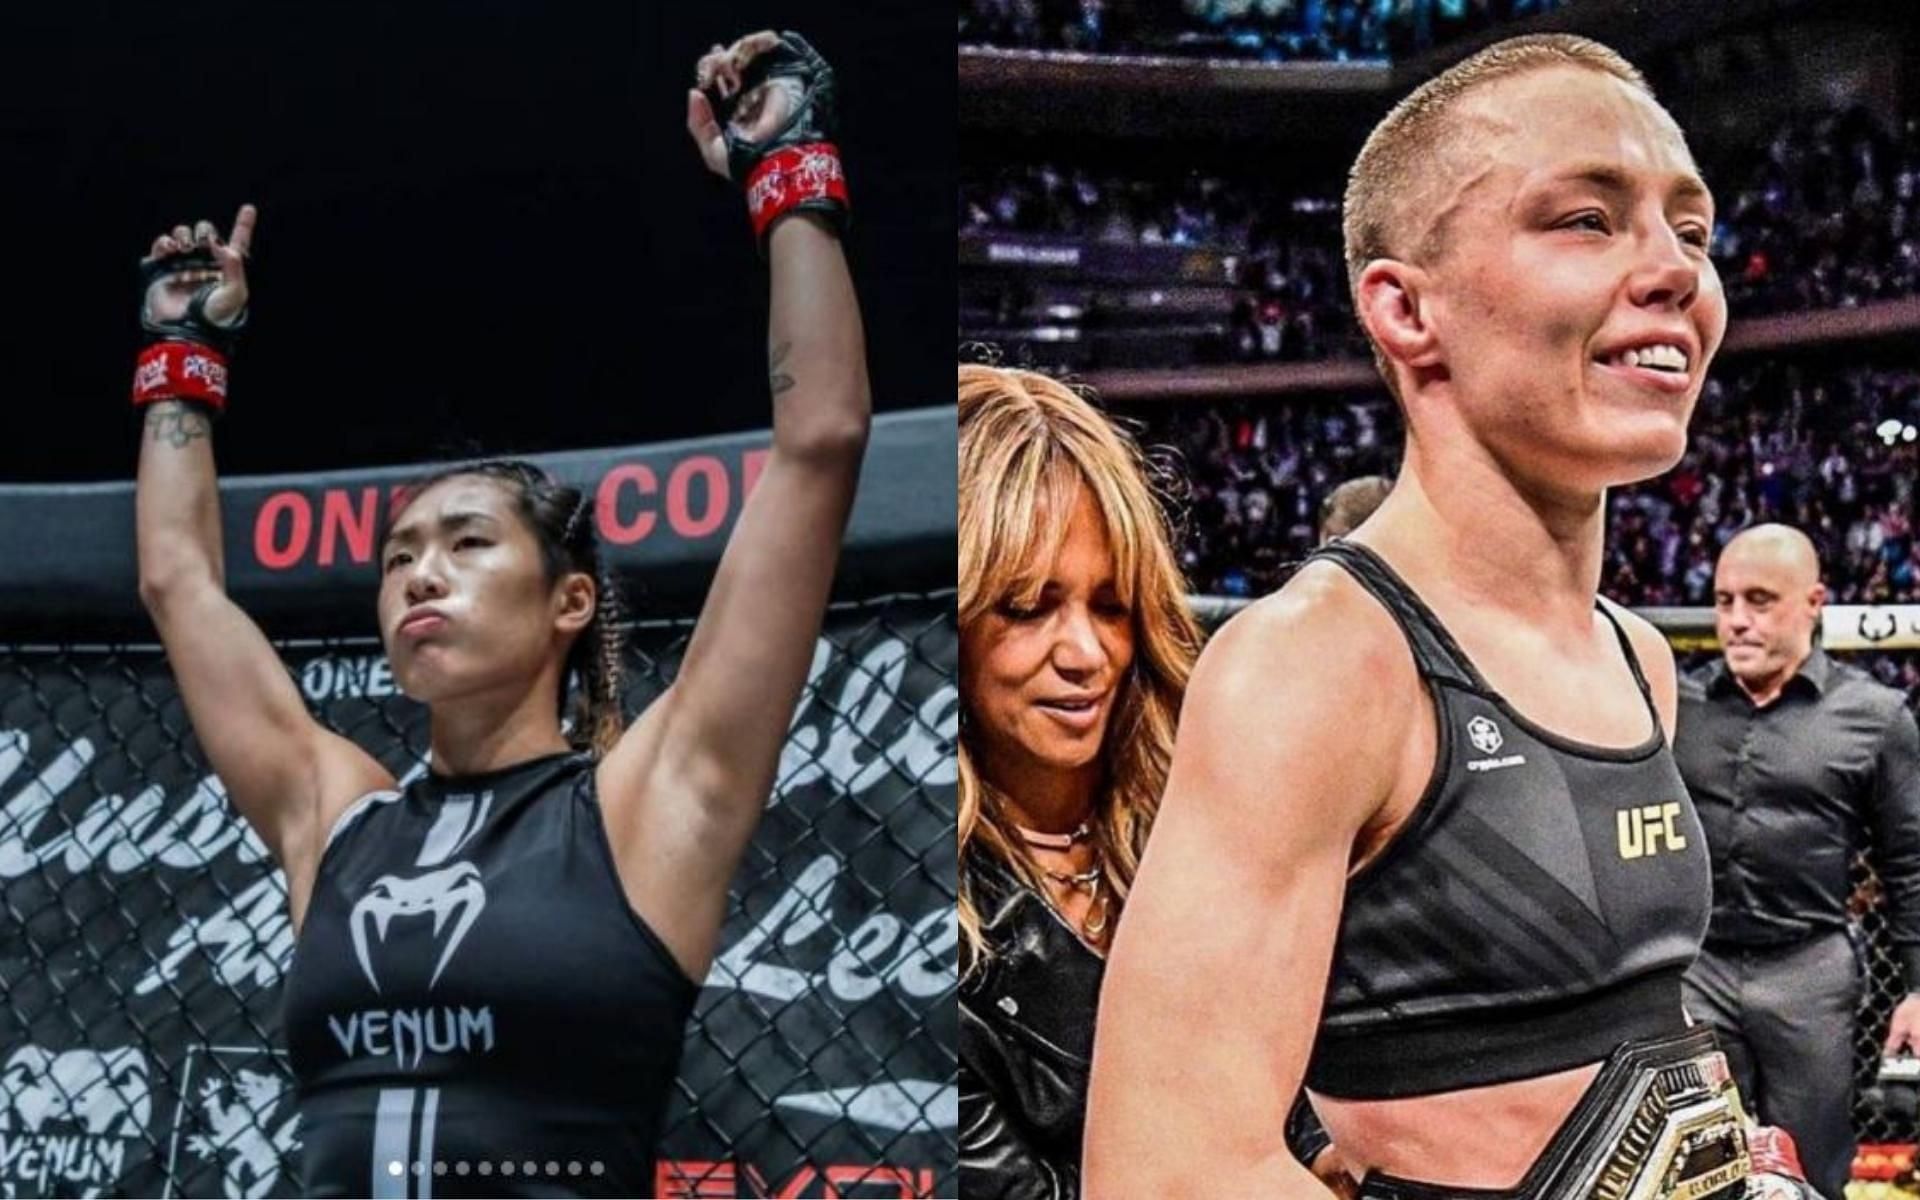 ONE Championship atomweight queen Angela Lee (left) can possibly give UFC strawweight champ Rose Namajunas (right) a run for her money. (Credits: @angelaleemma, @rosenamajunas via Instagram)